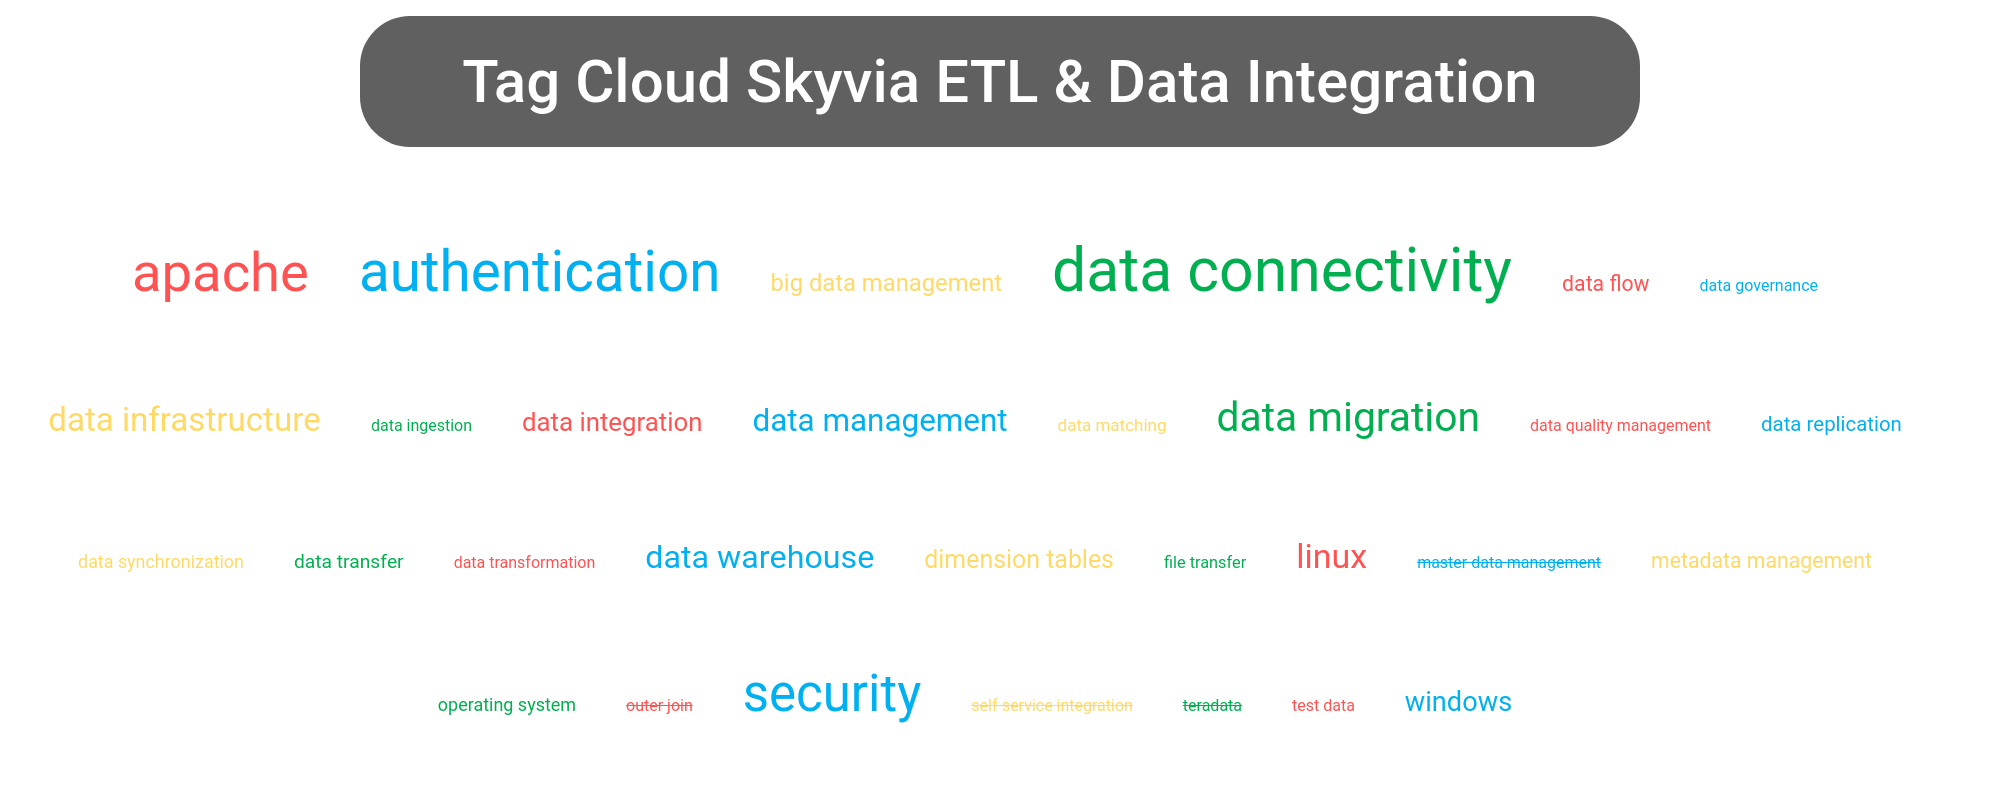 Tag cloud of the Skyvia ETL software.